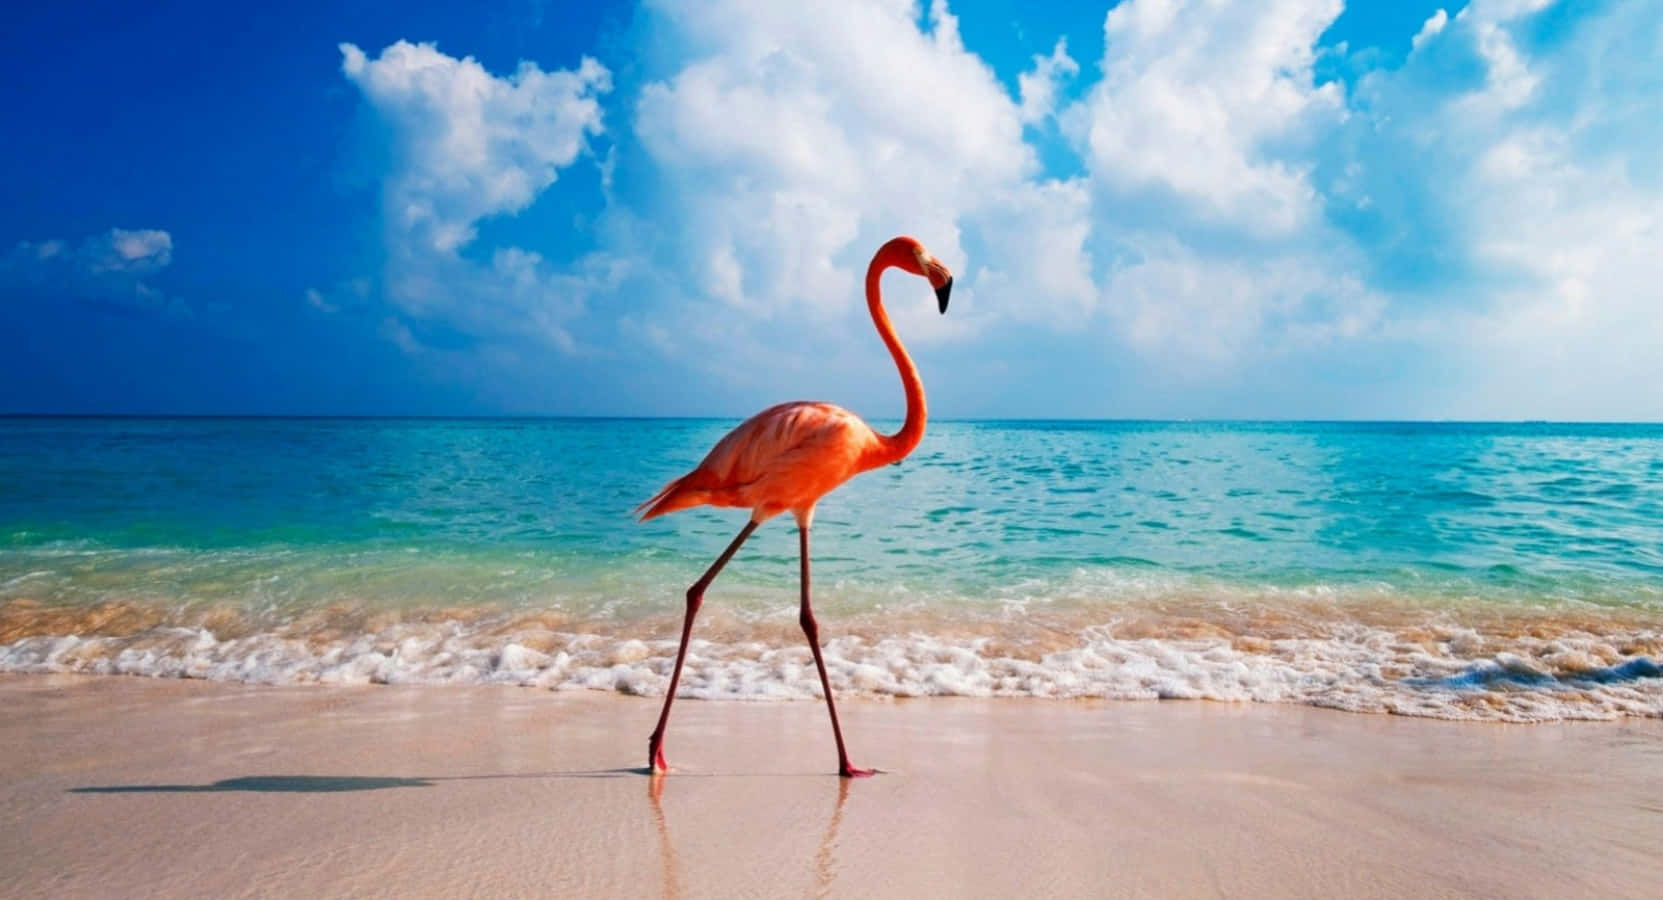 Everything about this Flamingo is Picture Perfect